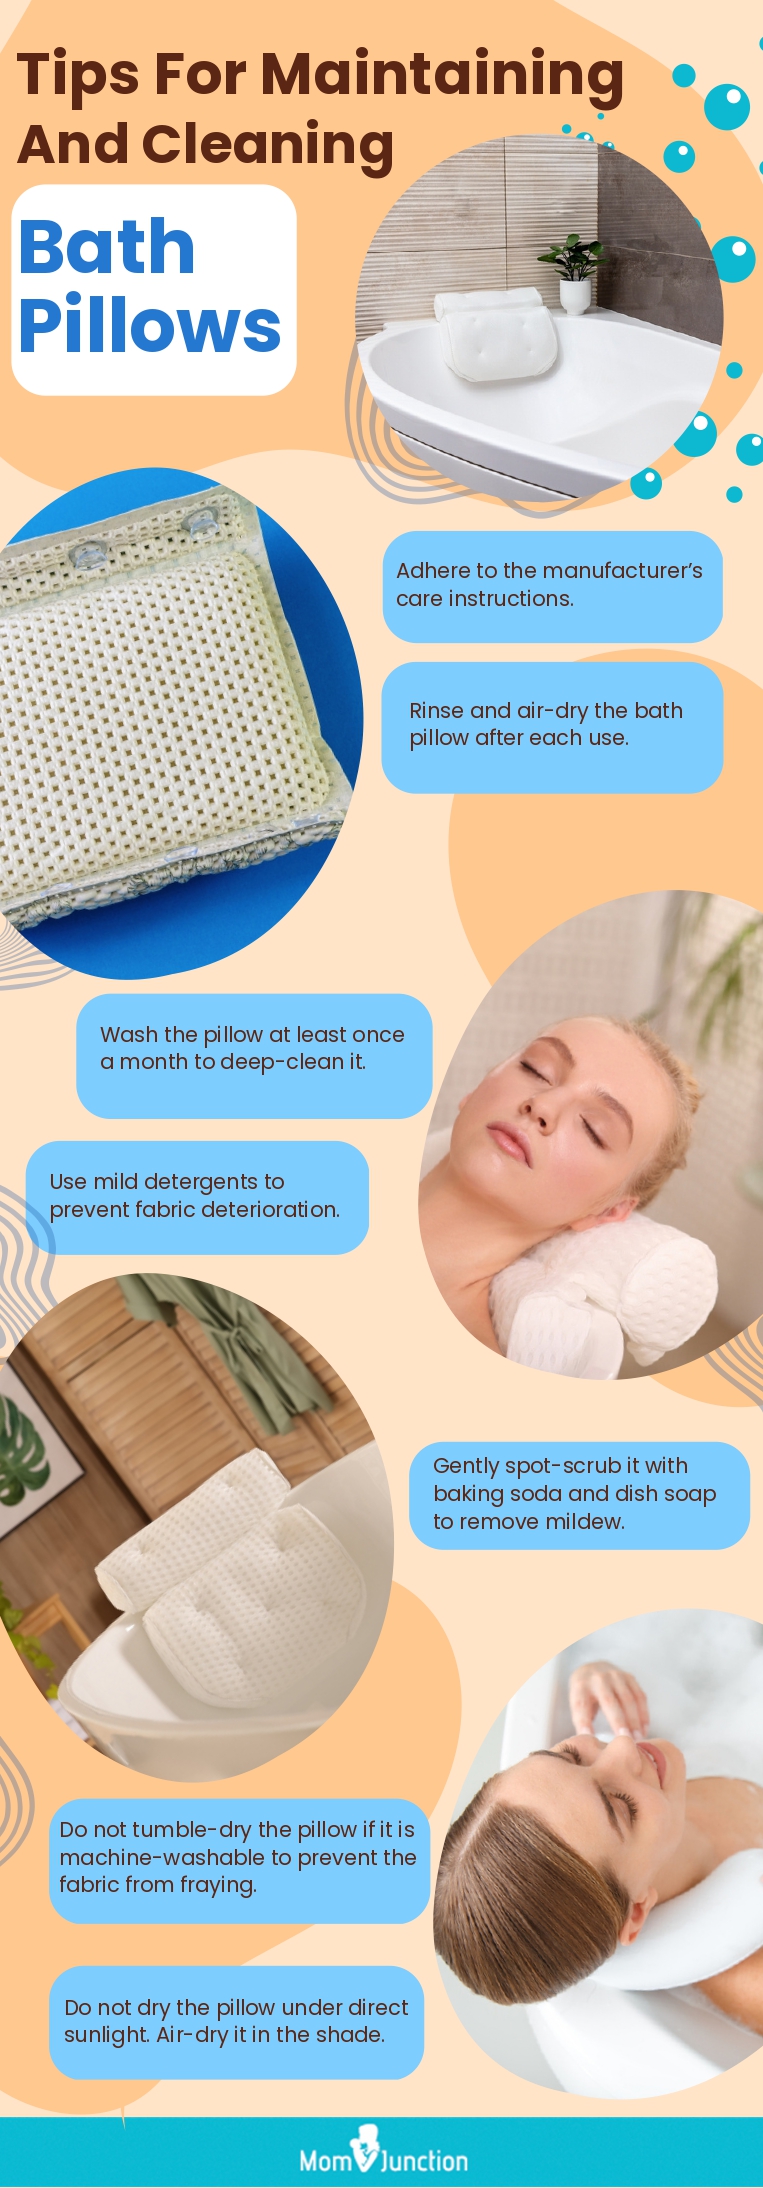 Tips For Maintaining And Cleaning Bath Pillows (infographic)